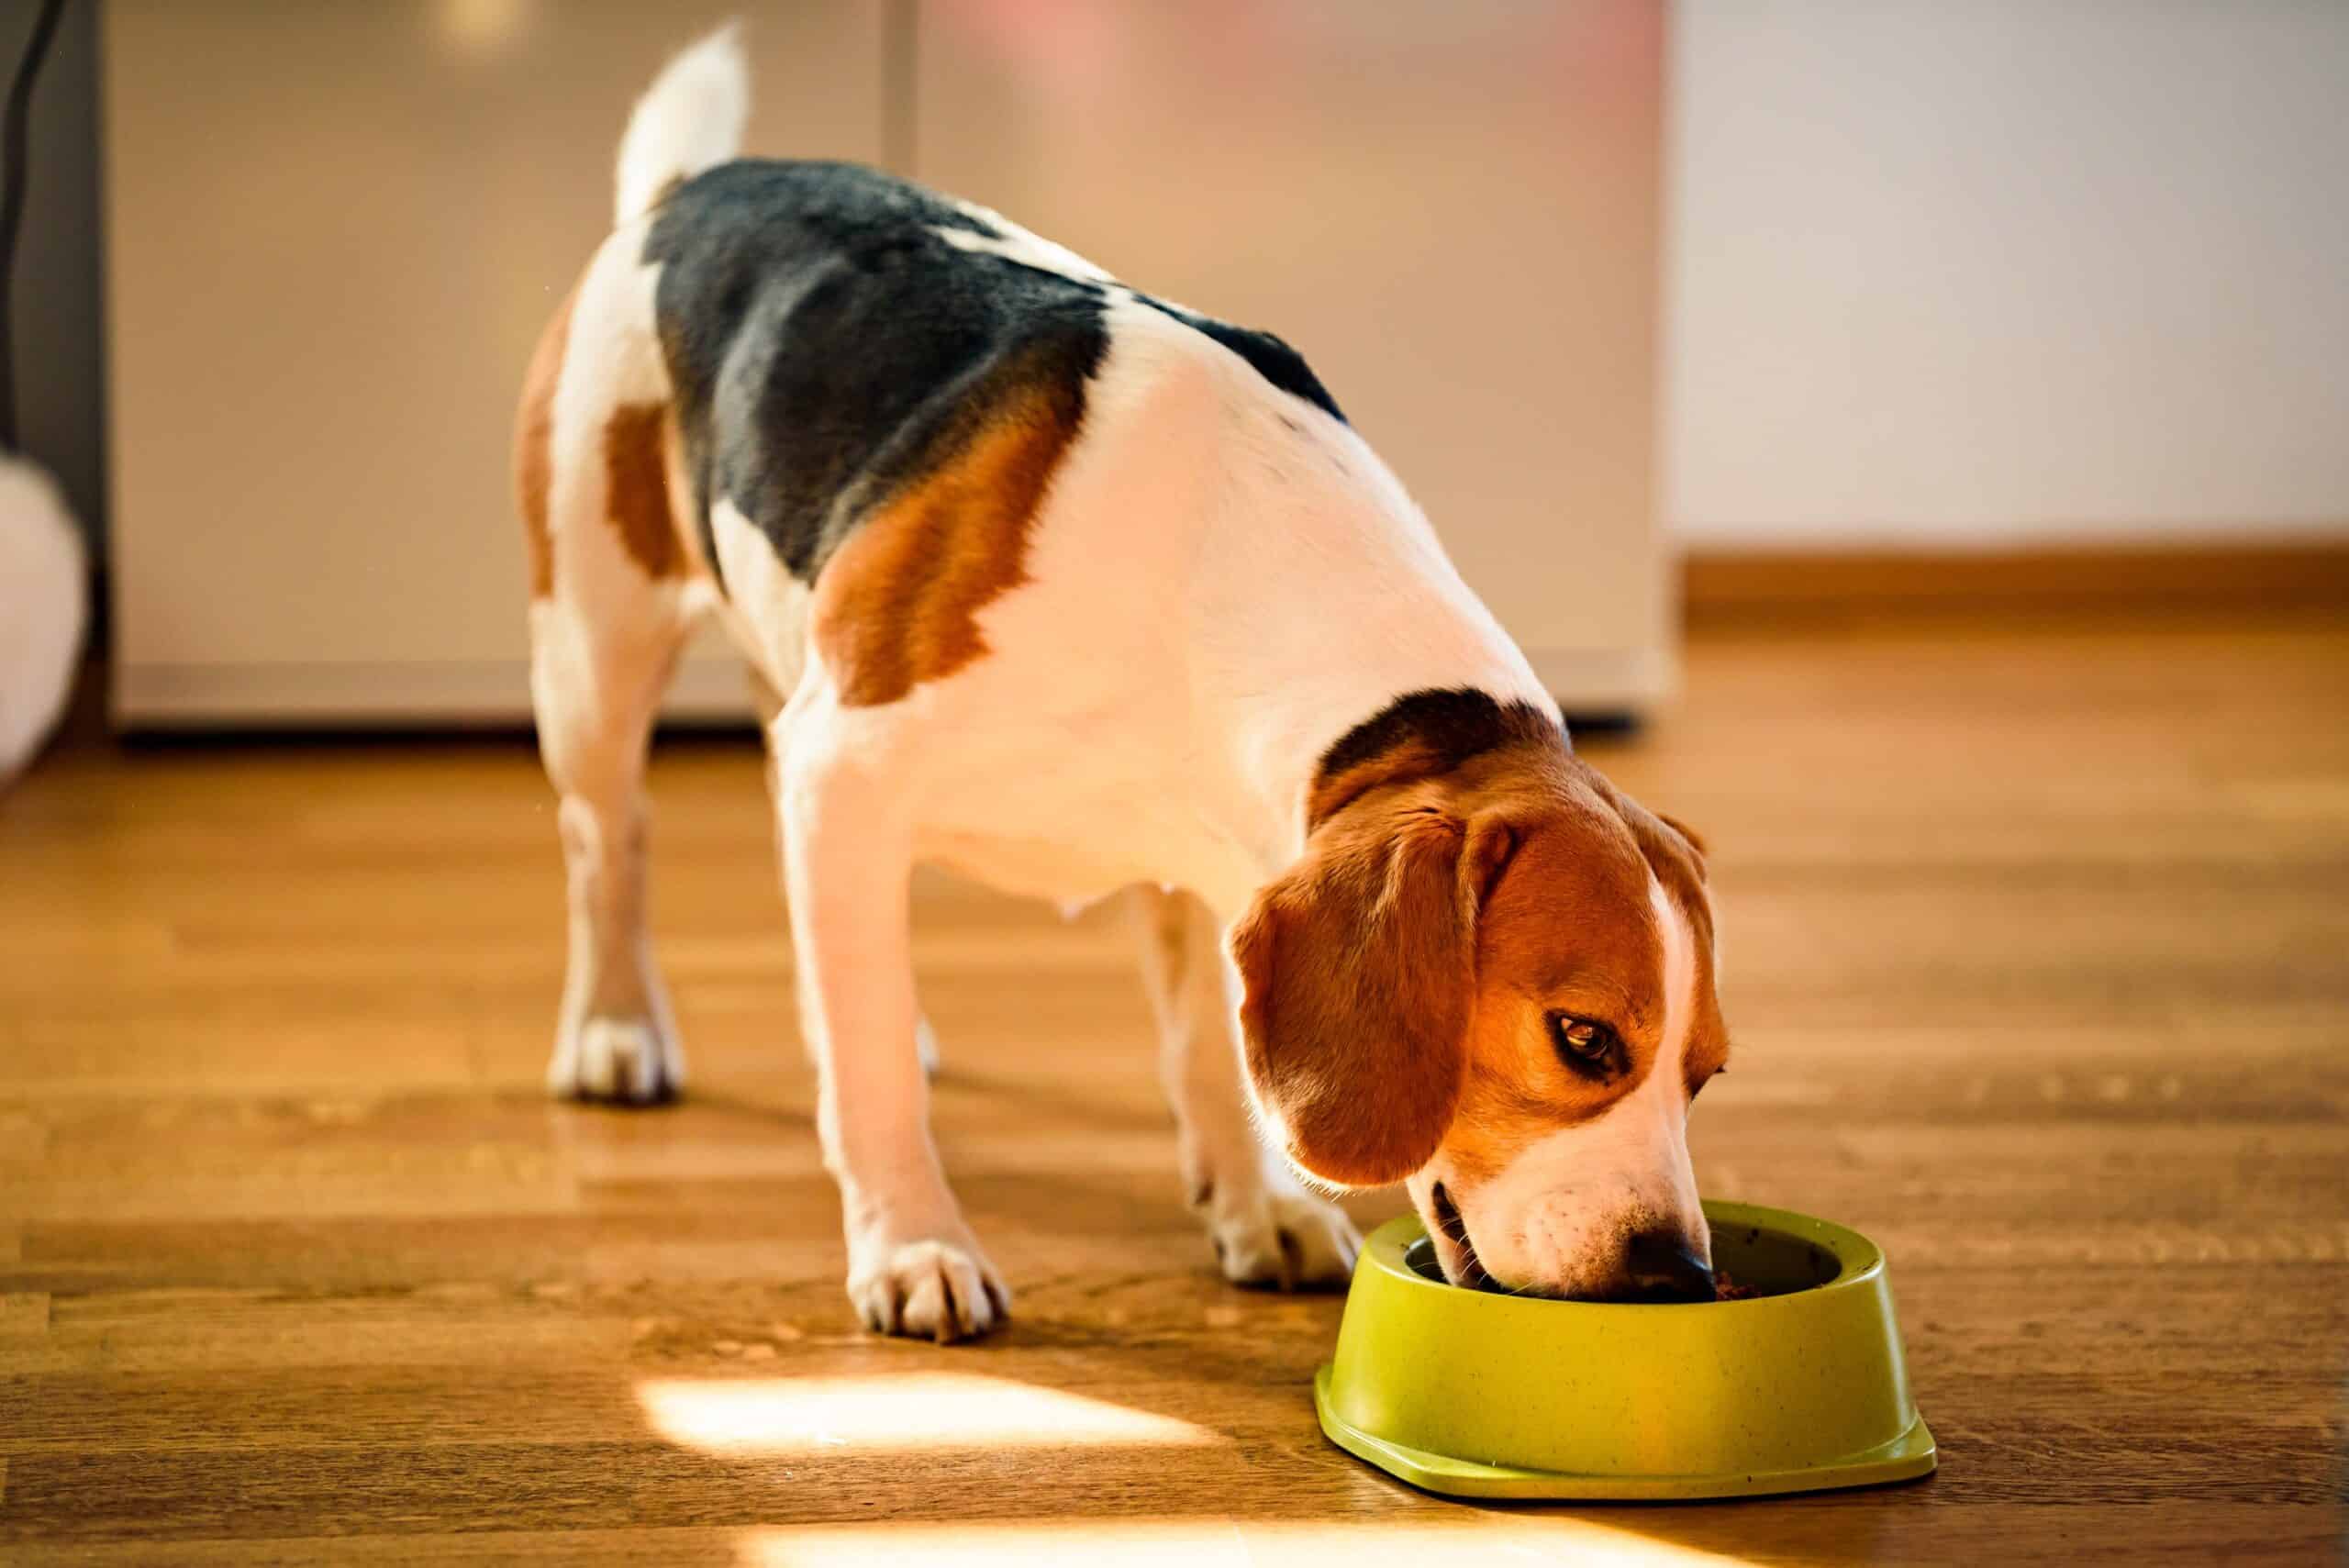 Is a high protein diet good for dogs?